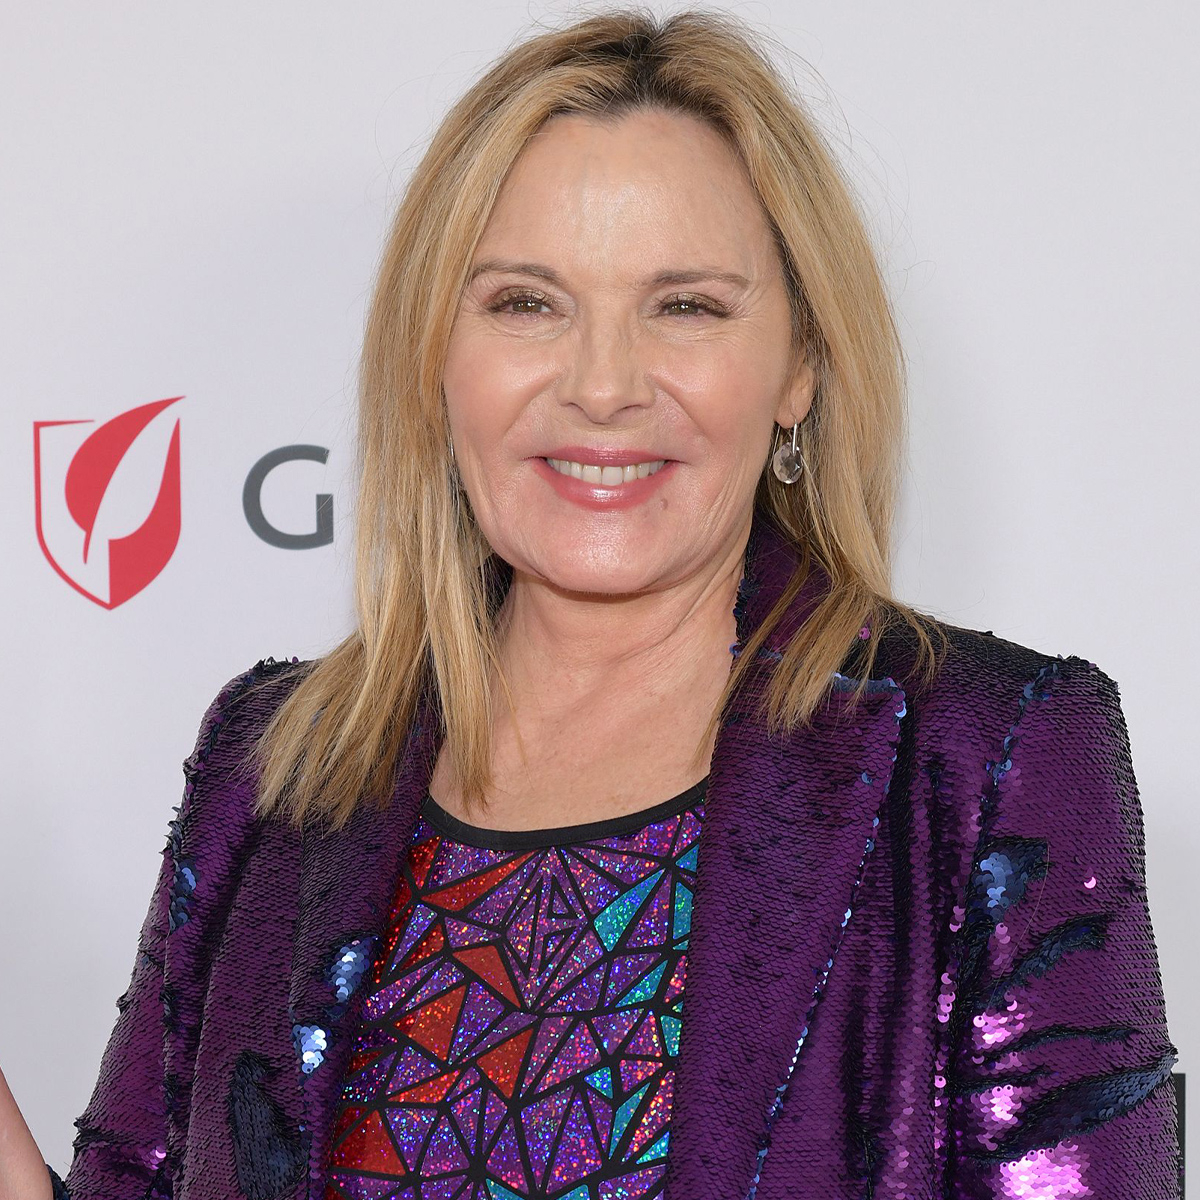 Kim Cattrall's Cuffed Jeans Can Be Copied with These Lookalikes